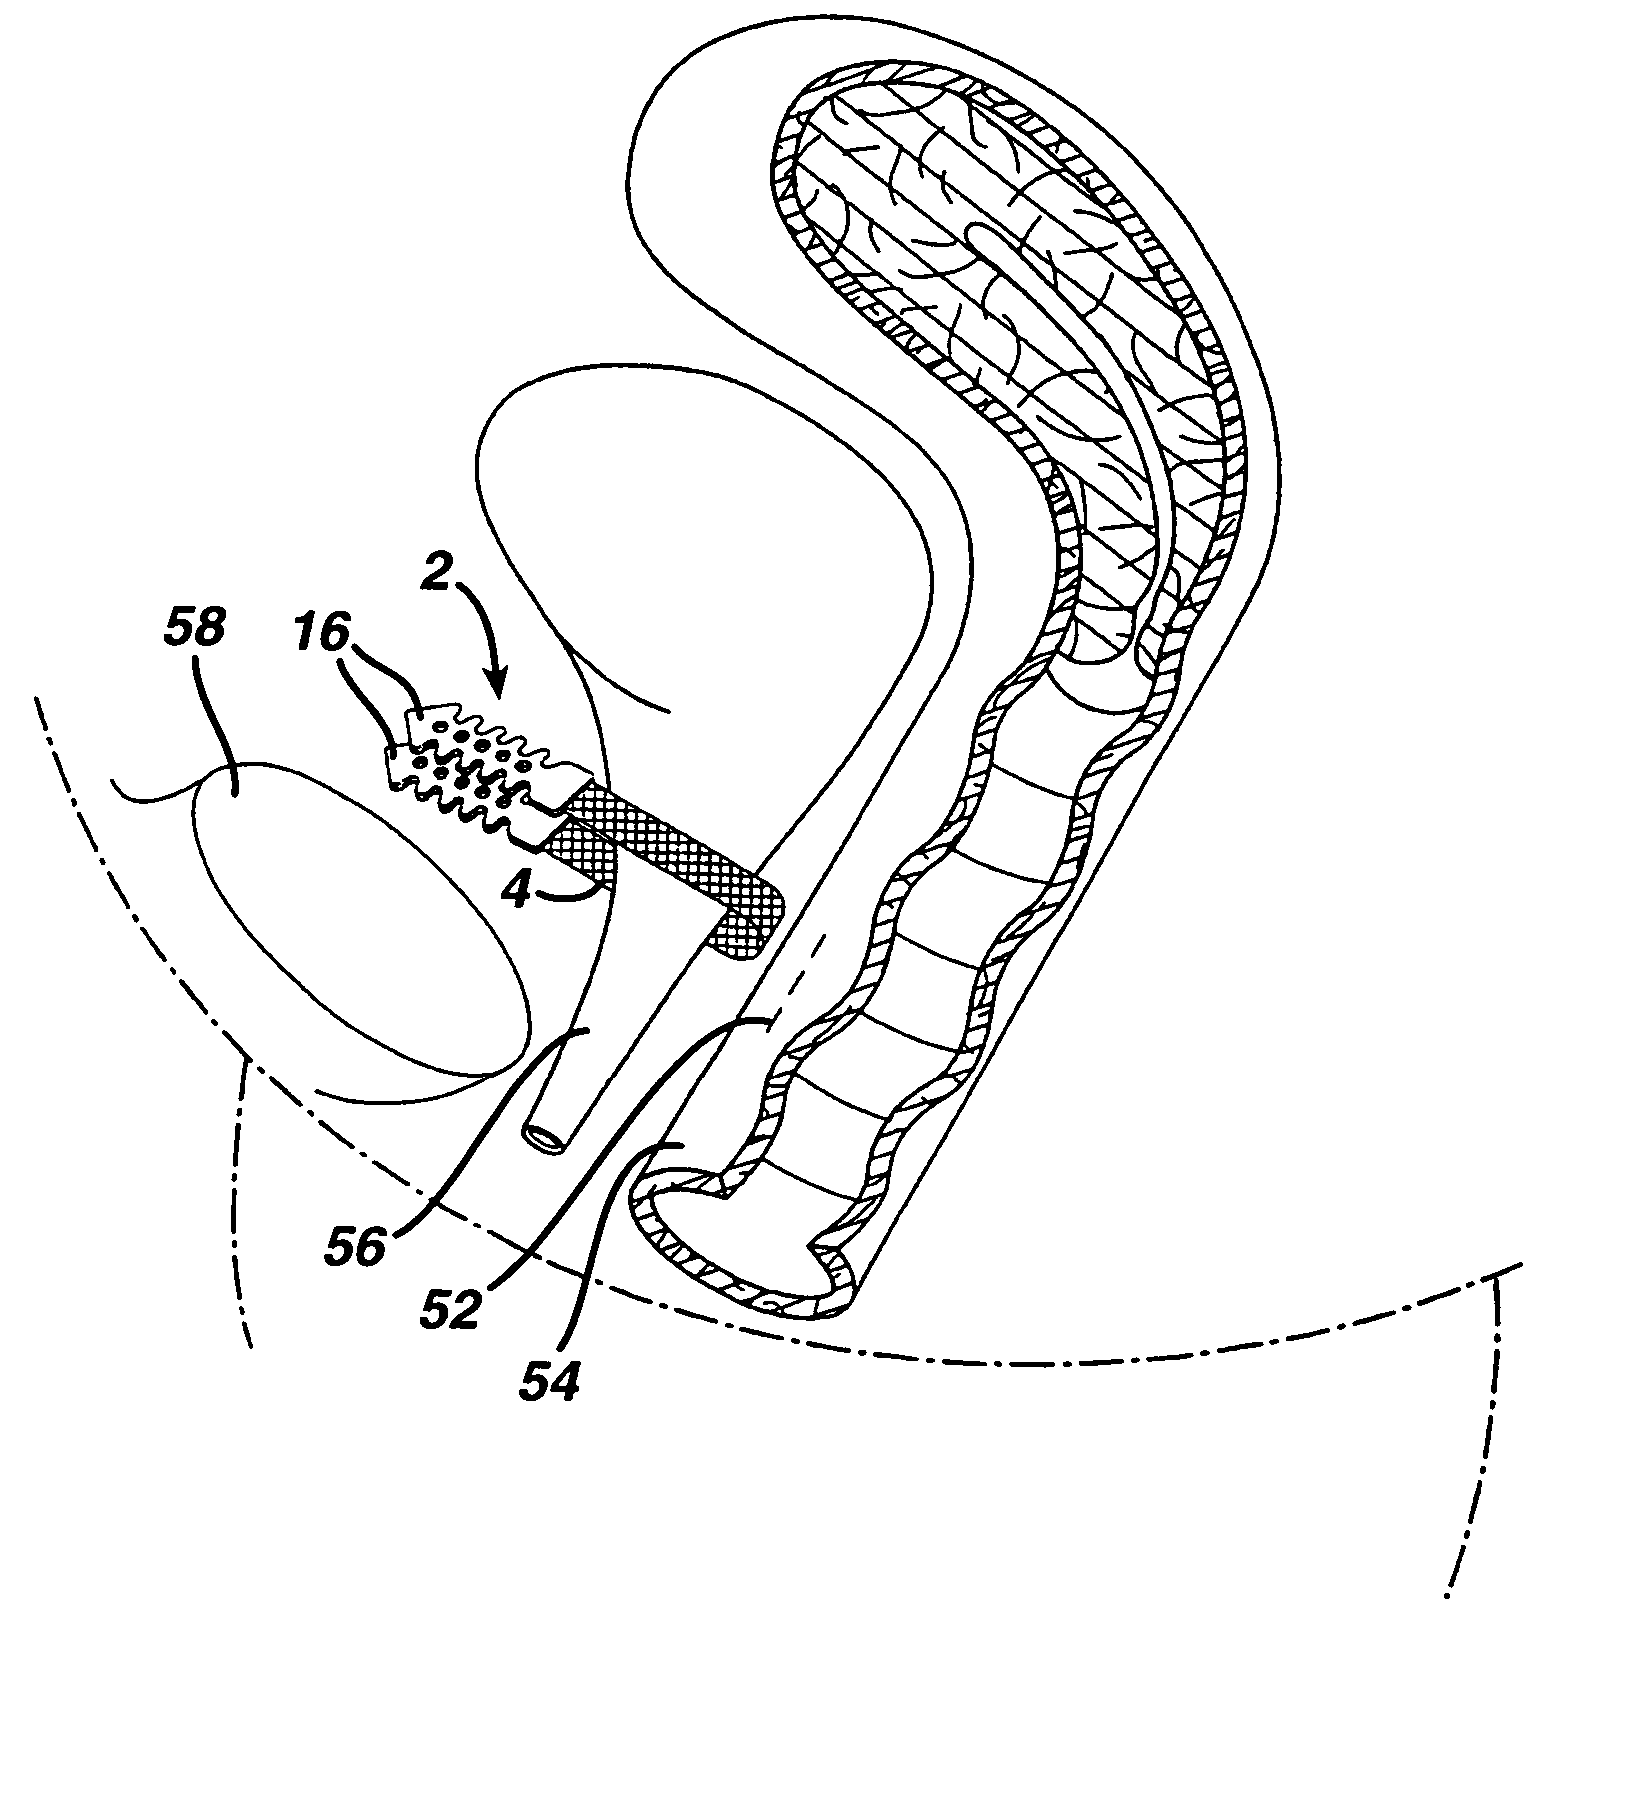 Minimally invasive medical implant and insertion device and method for using the same